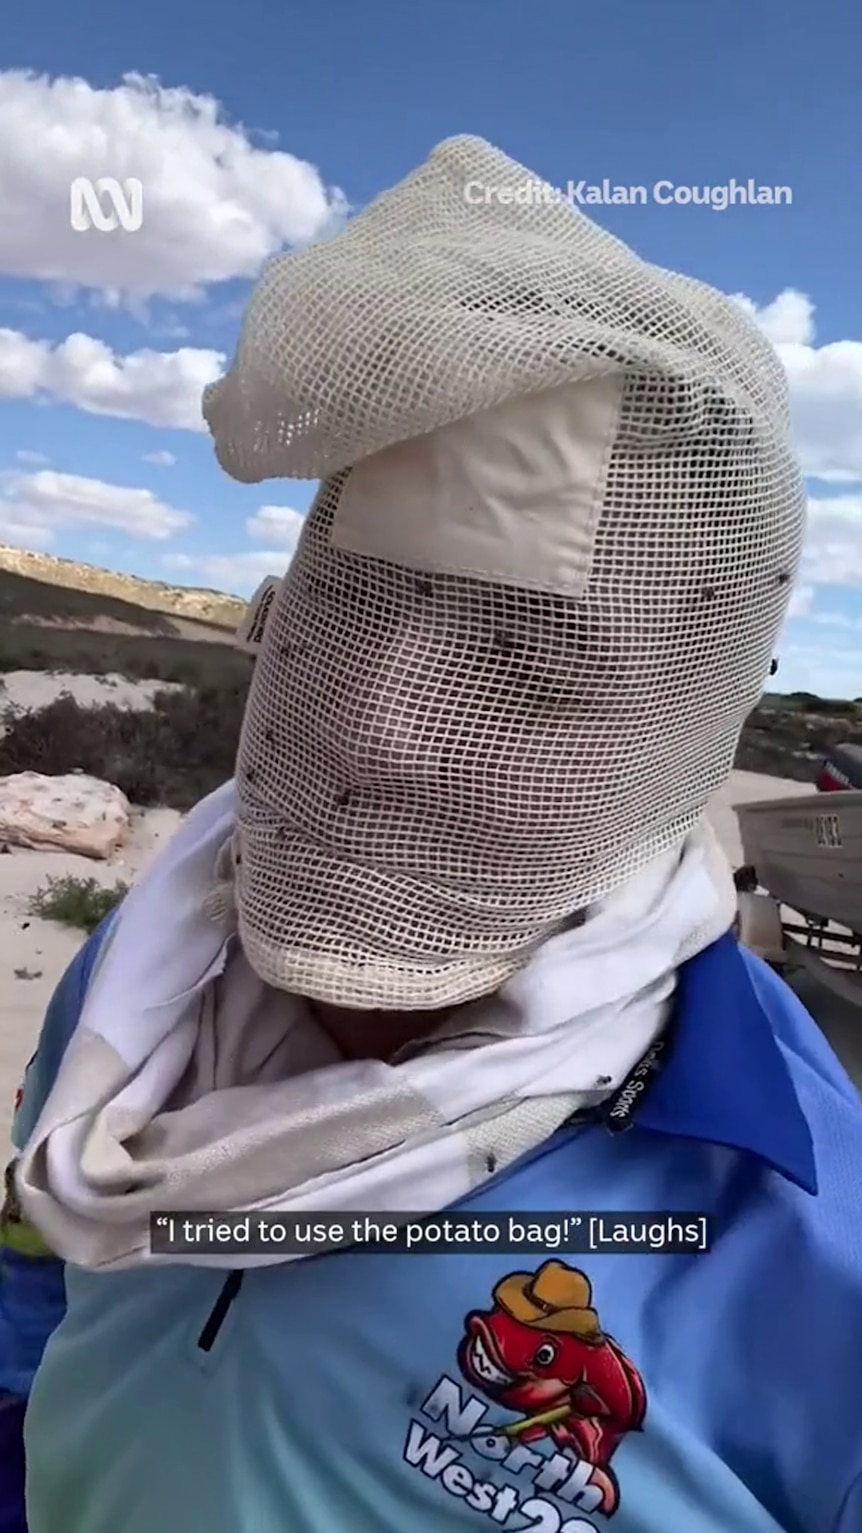 A person dressed in a blue shirt has their face concealed by fly-covered  white netting stretched over their head